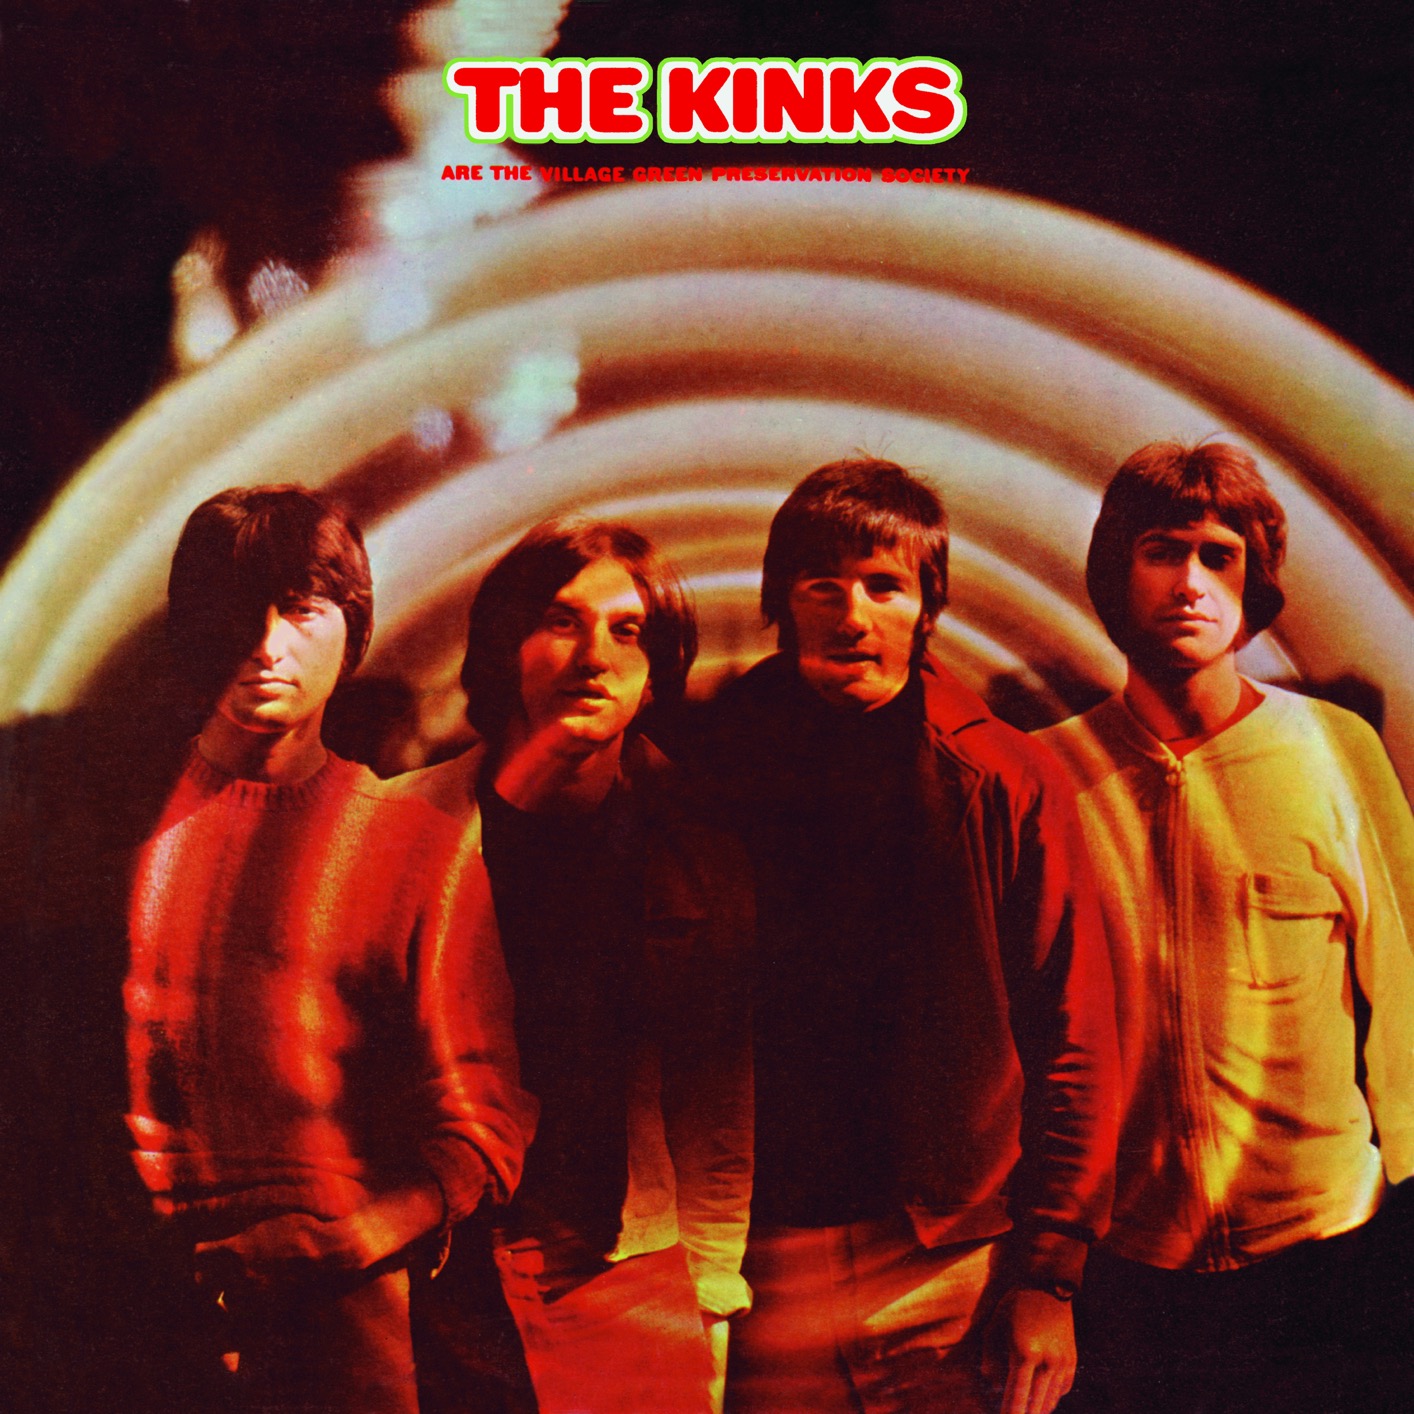 The Kinks - The Kinks Are The Village Green Preservation Society (2018 Stereo Remaster) (1968/2018) [FLAC 24bit/48kHz]